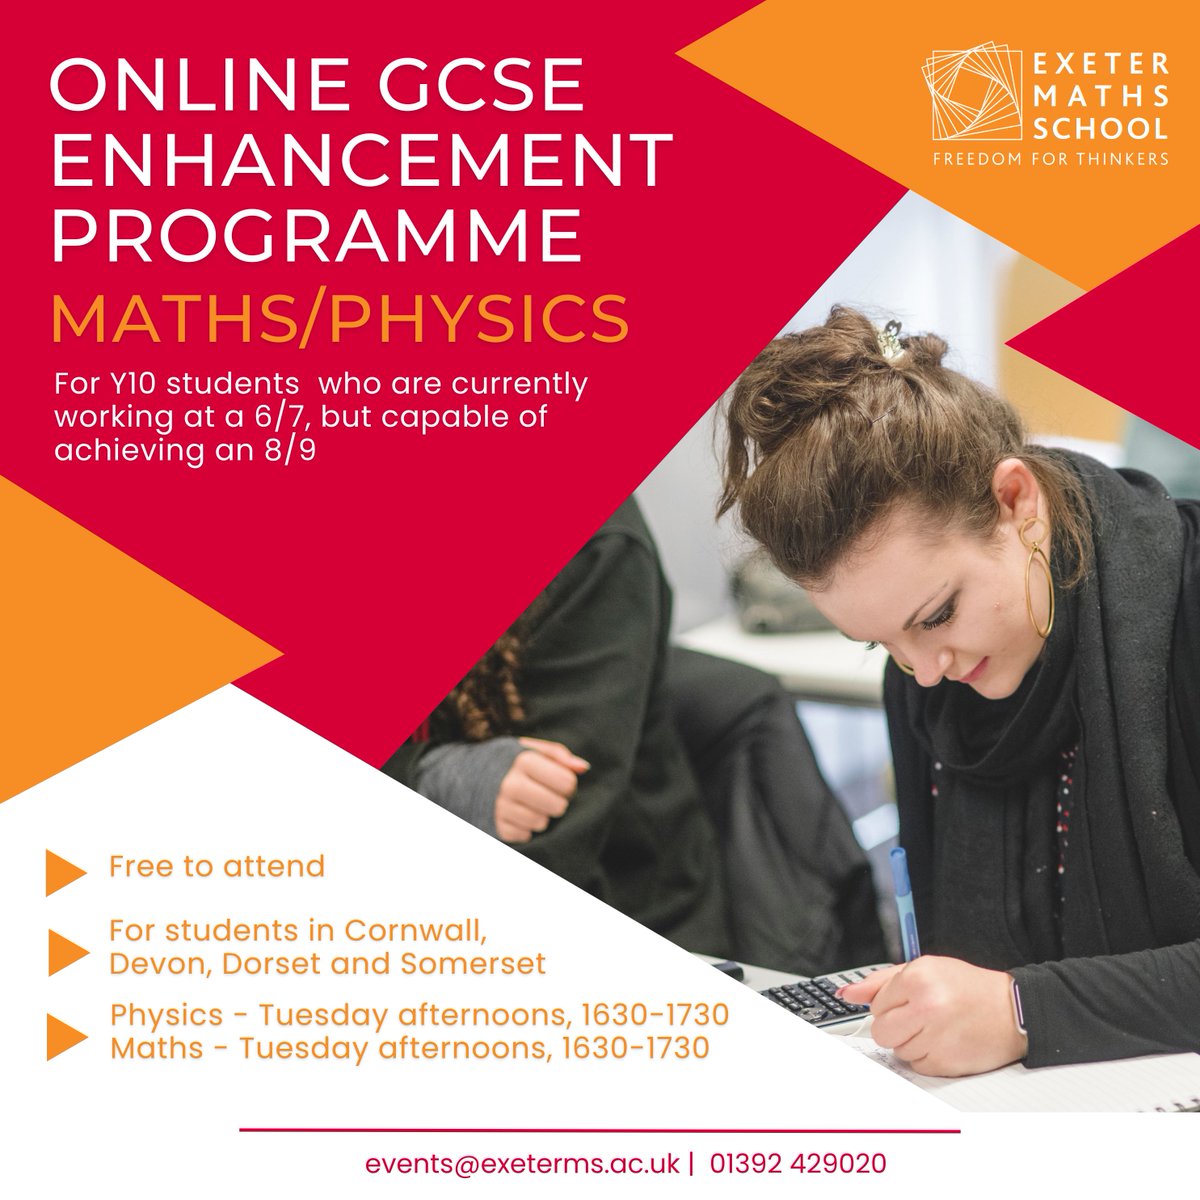 📢Calling all Y10 students in the South West 👉If you're working at a 6/7, but are capable of achieving an 8/9 in Maths or Physics, our online GCSE Enhancement programme, could be right for you ✅Speak with your teacher, or get in touch to find out more: events@exeterms.ac.uk